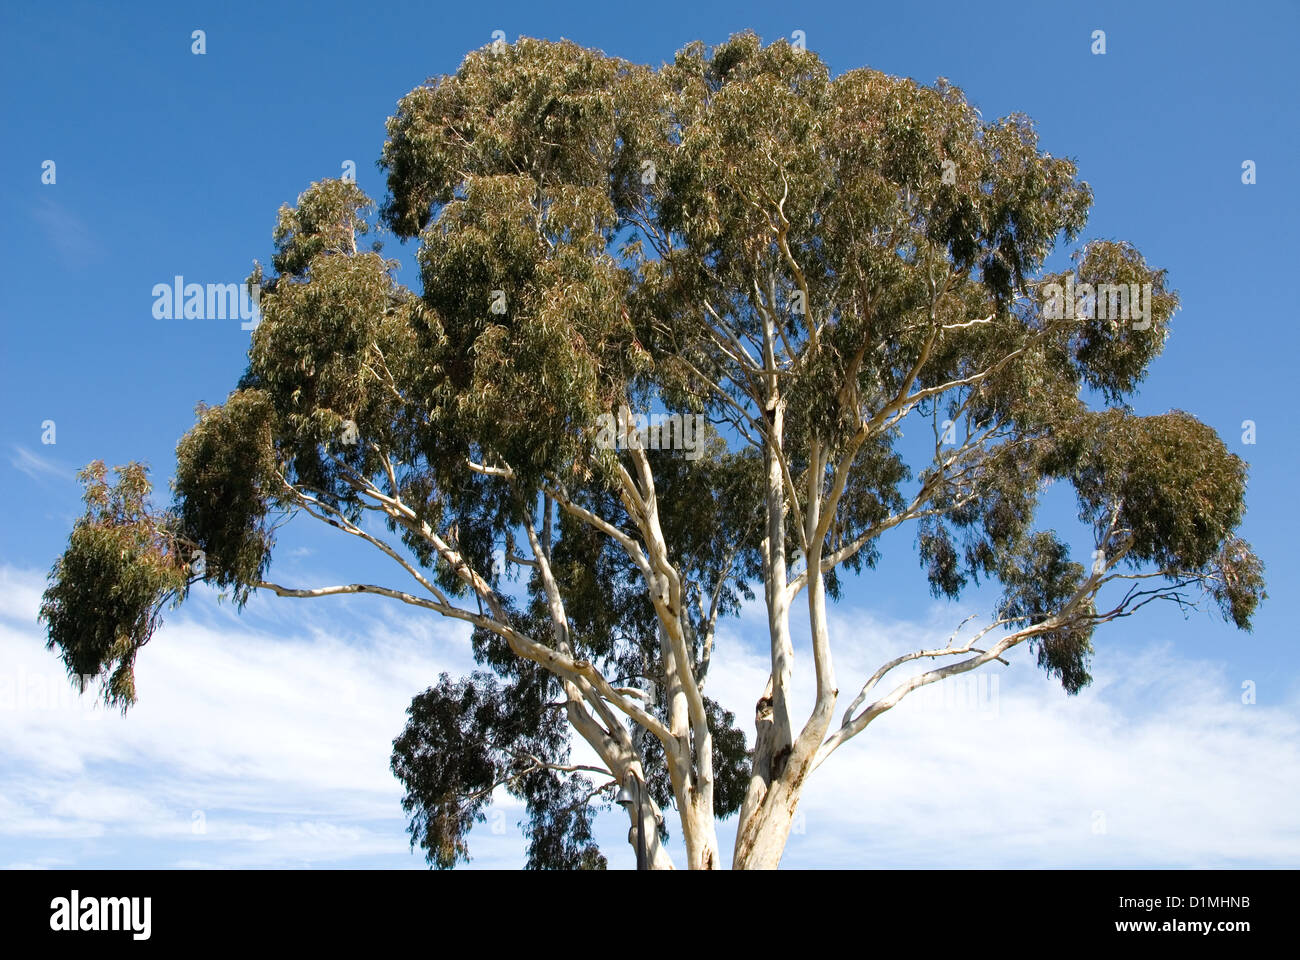 The crown of a Eucalyptus tree, growing in Canberra, Australia Stock Photo